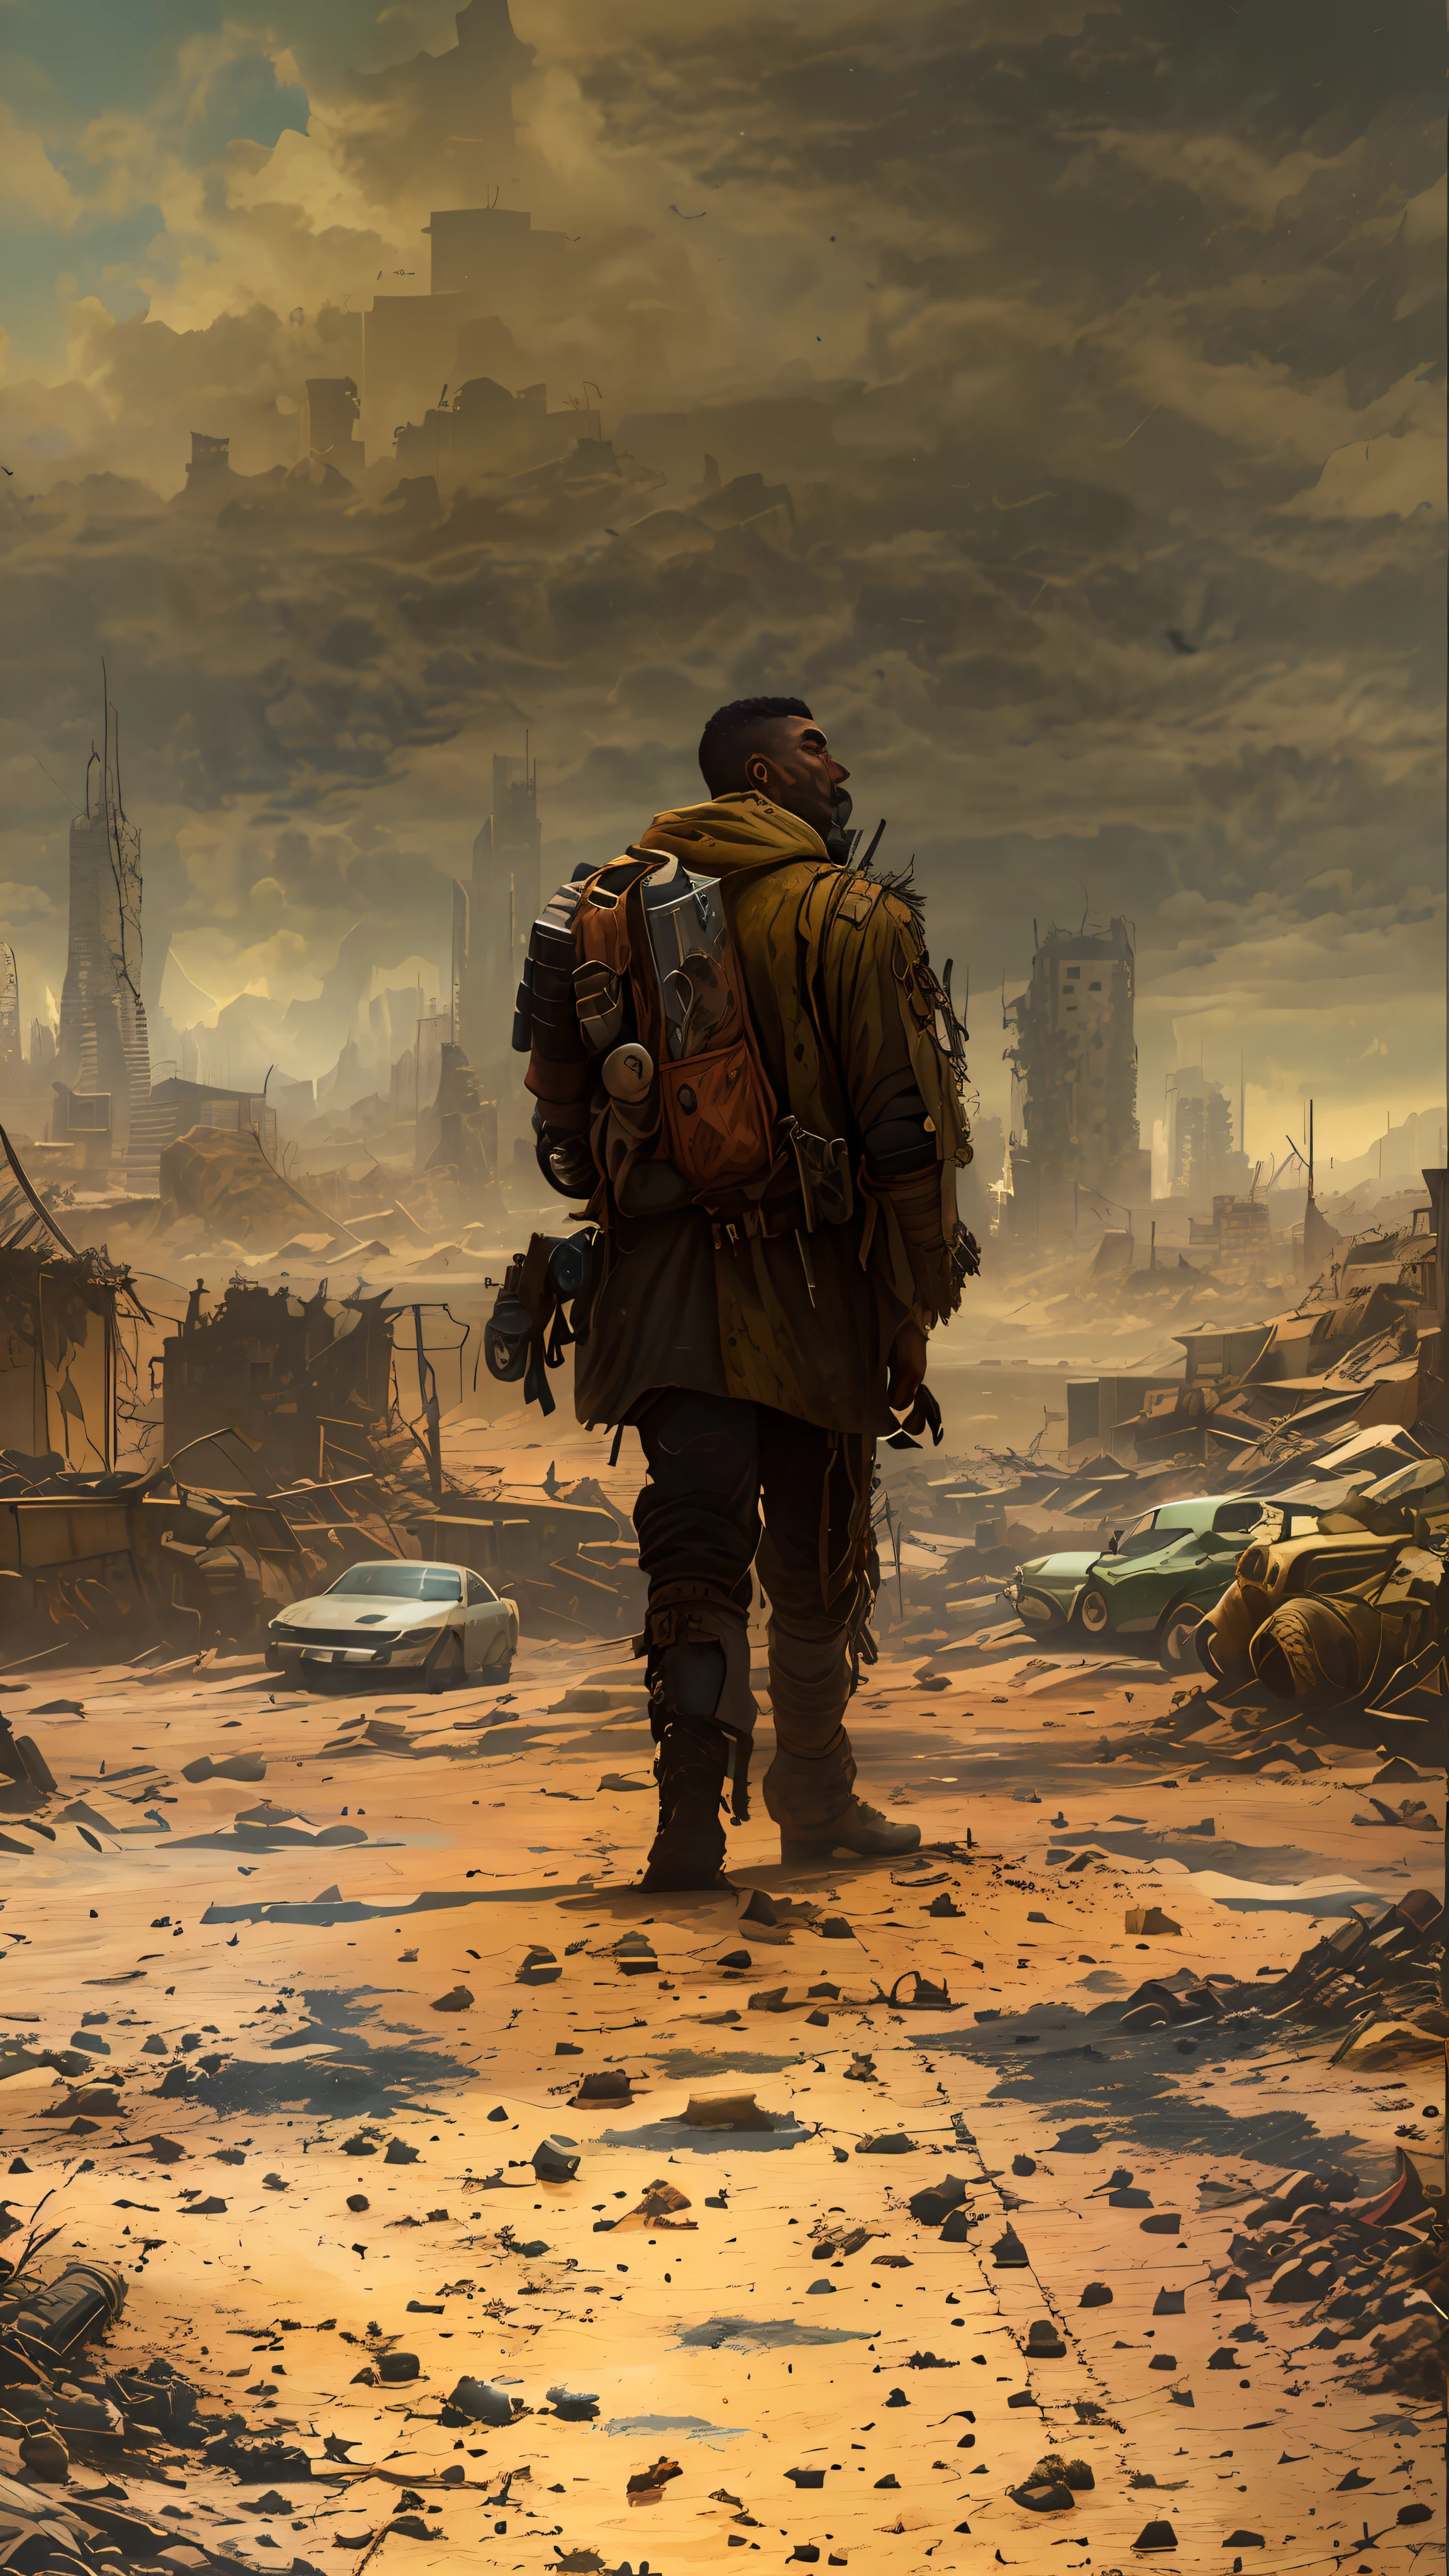 arafed man walking in a ruined city with a dog, in postapocalypse city, in a post-apocalyptic wasteland, post - apocalyptic, post-apocalyptic, post apocalyptic, in a post apocalyptic setting, in a post apocalyptic city, post apocalyptic world, destroyed city in the background, postapocalyptic, post-apocalypse, post - apocalypse